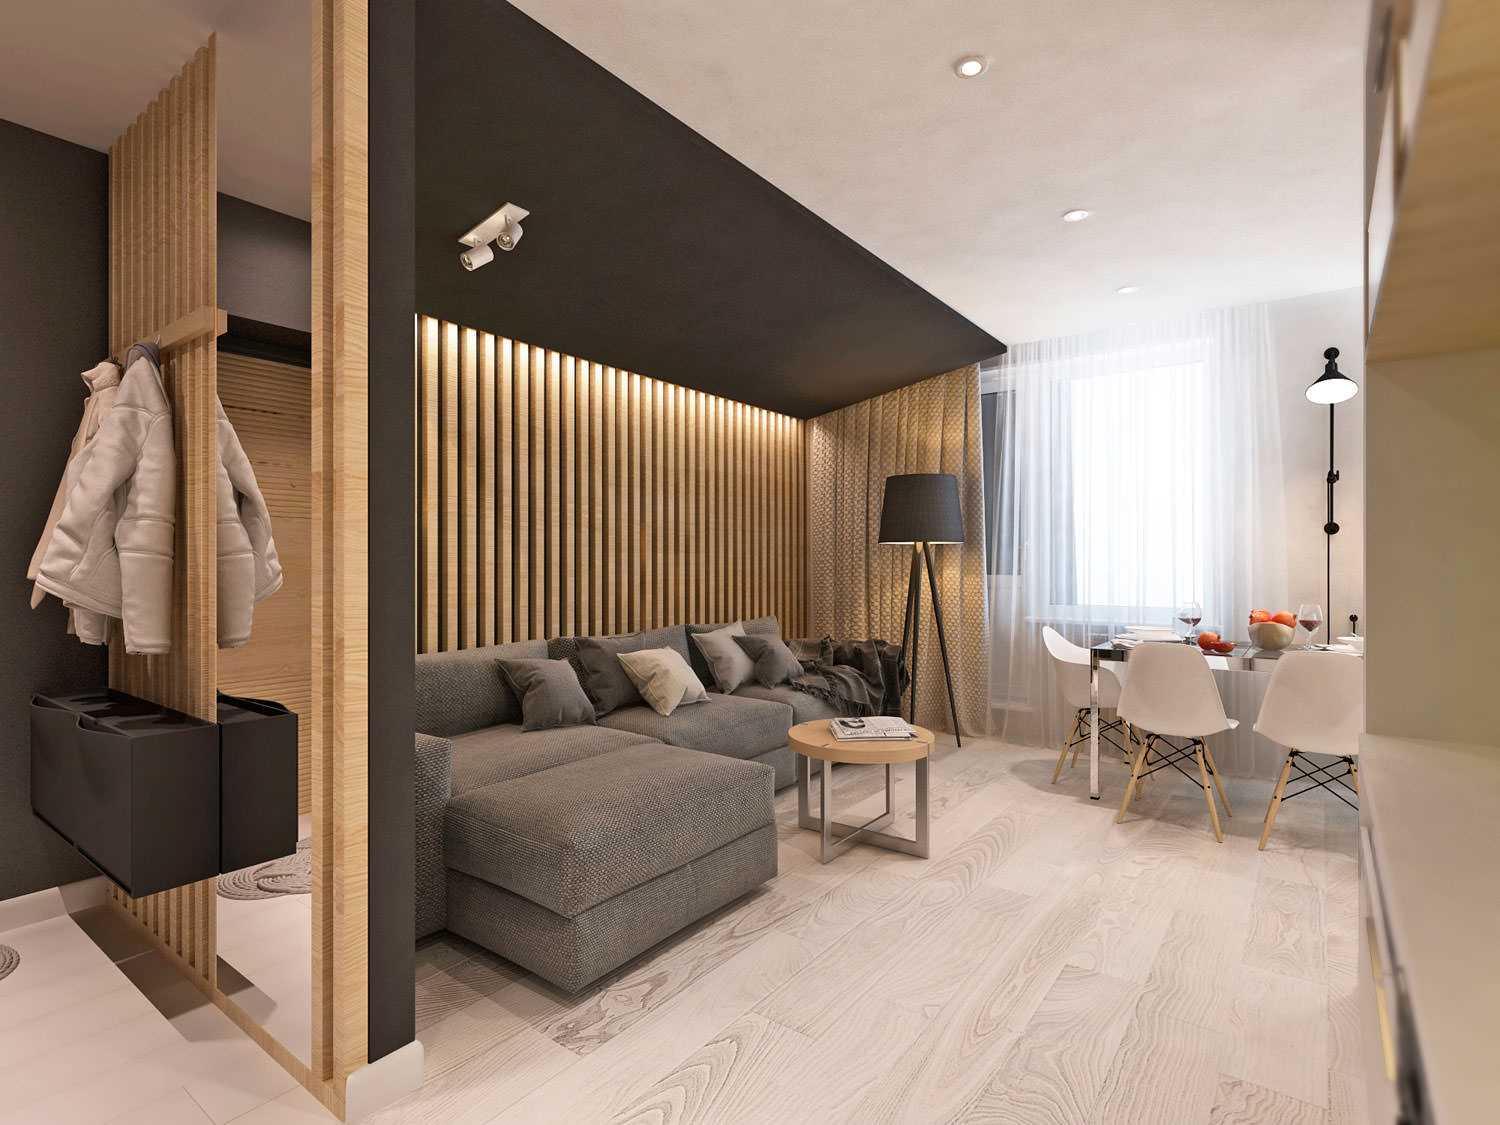 Design of a living area in a city apartment